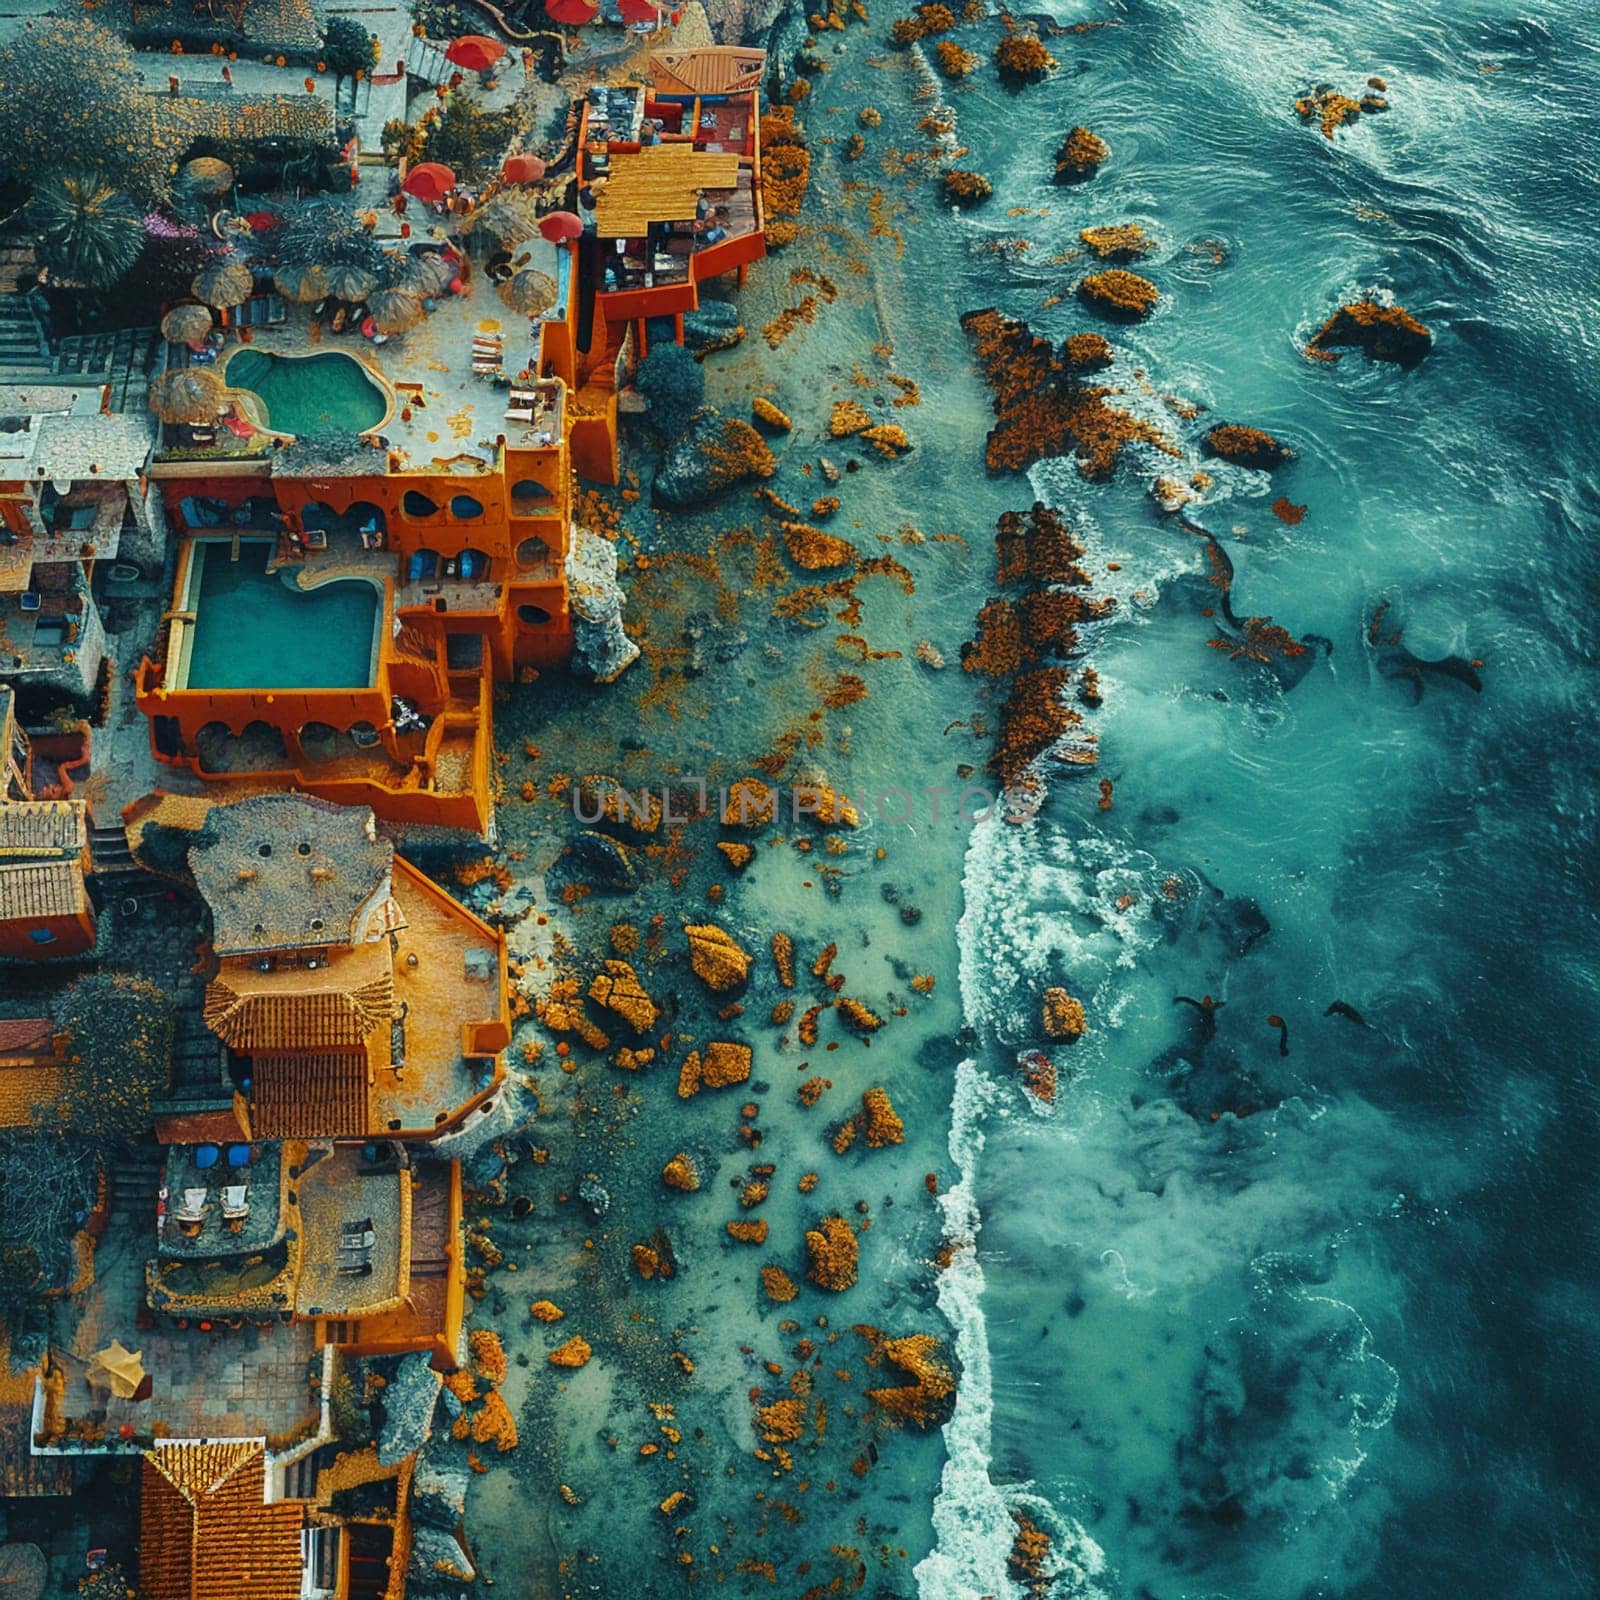 Drone view of a coastal town, illustrating perspective and the blend of nature and civilization.